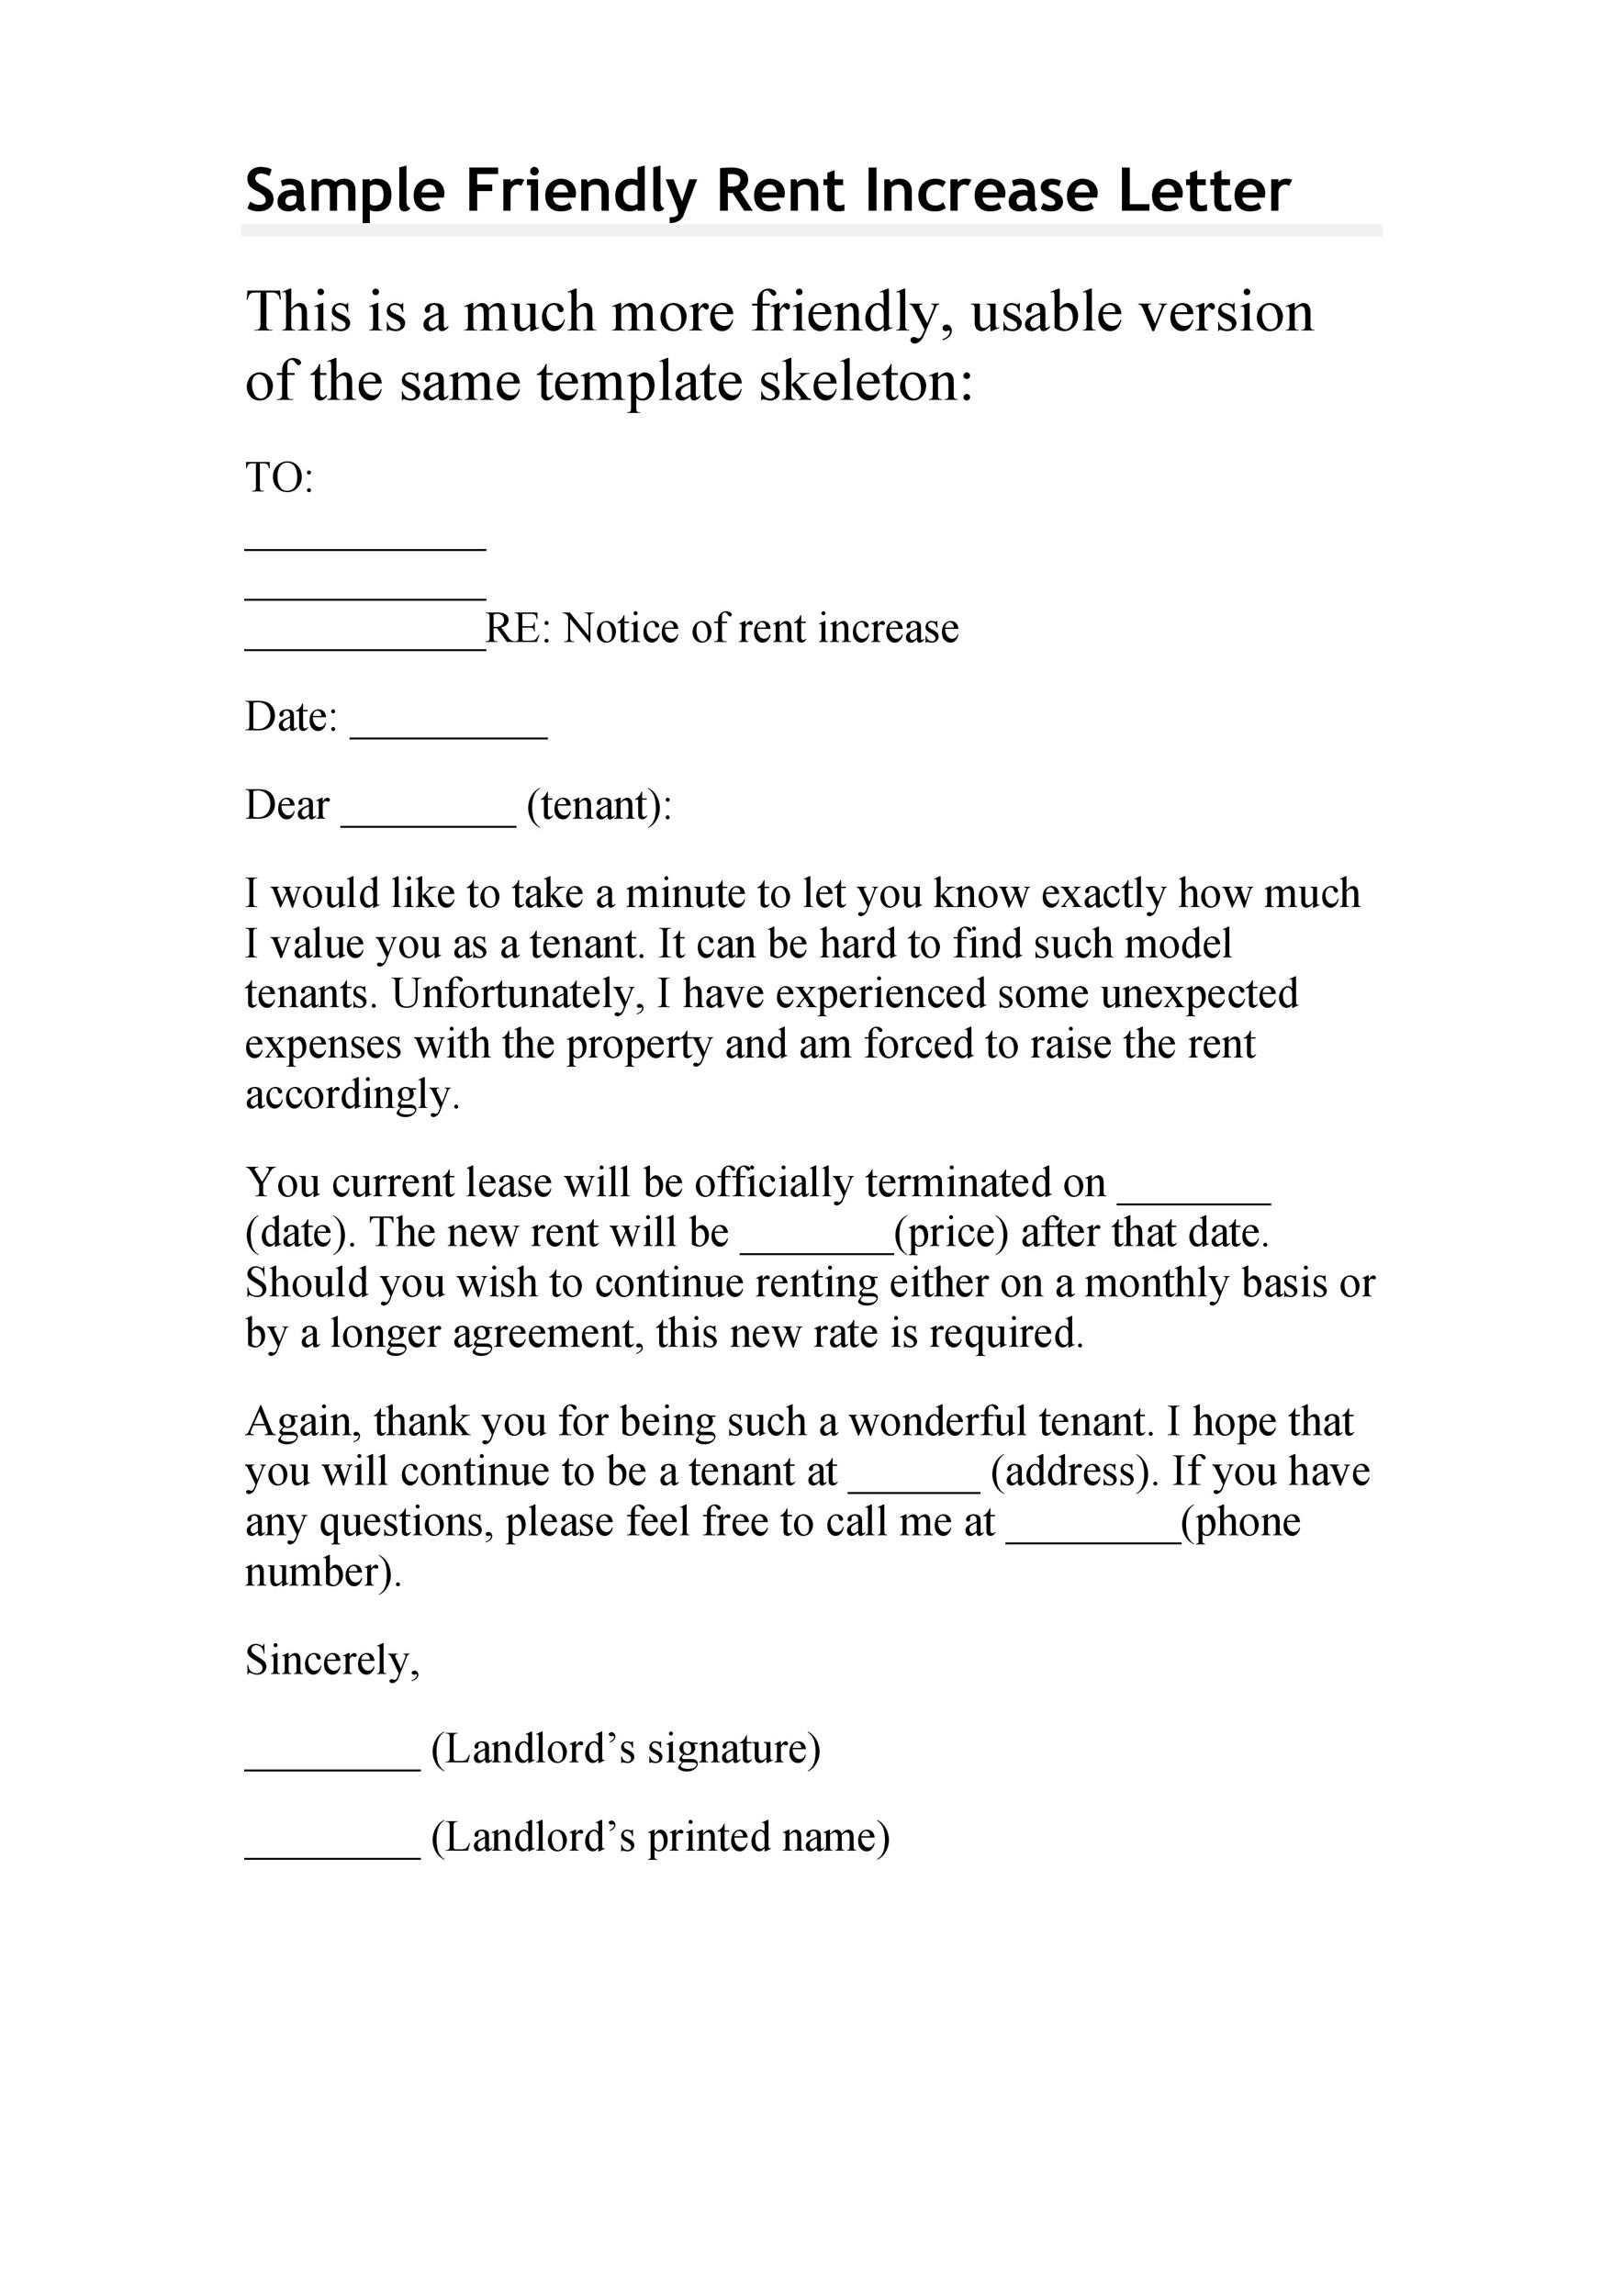 How To Increase Rent On Rental Property - Property Walls With Regard To Rent Increase Letter Template